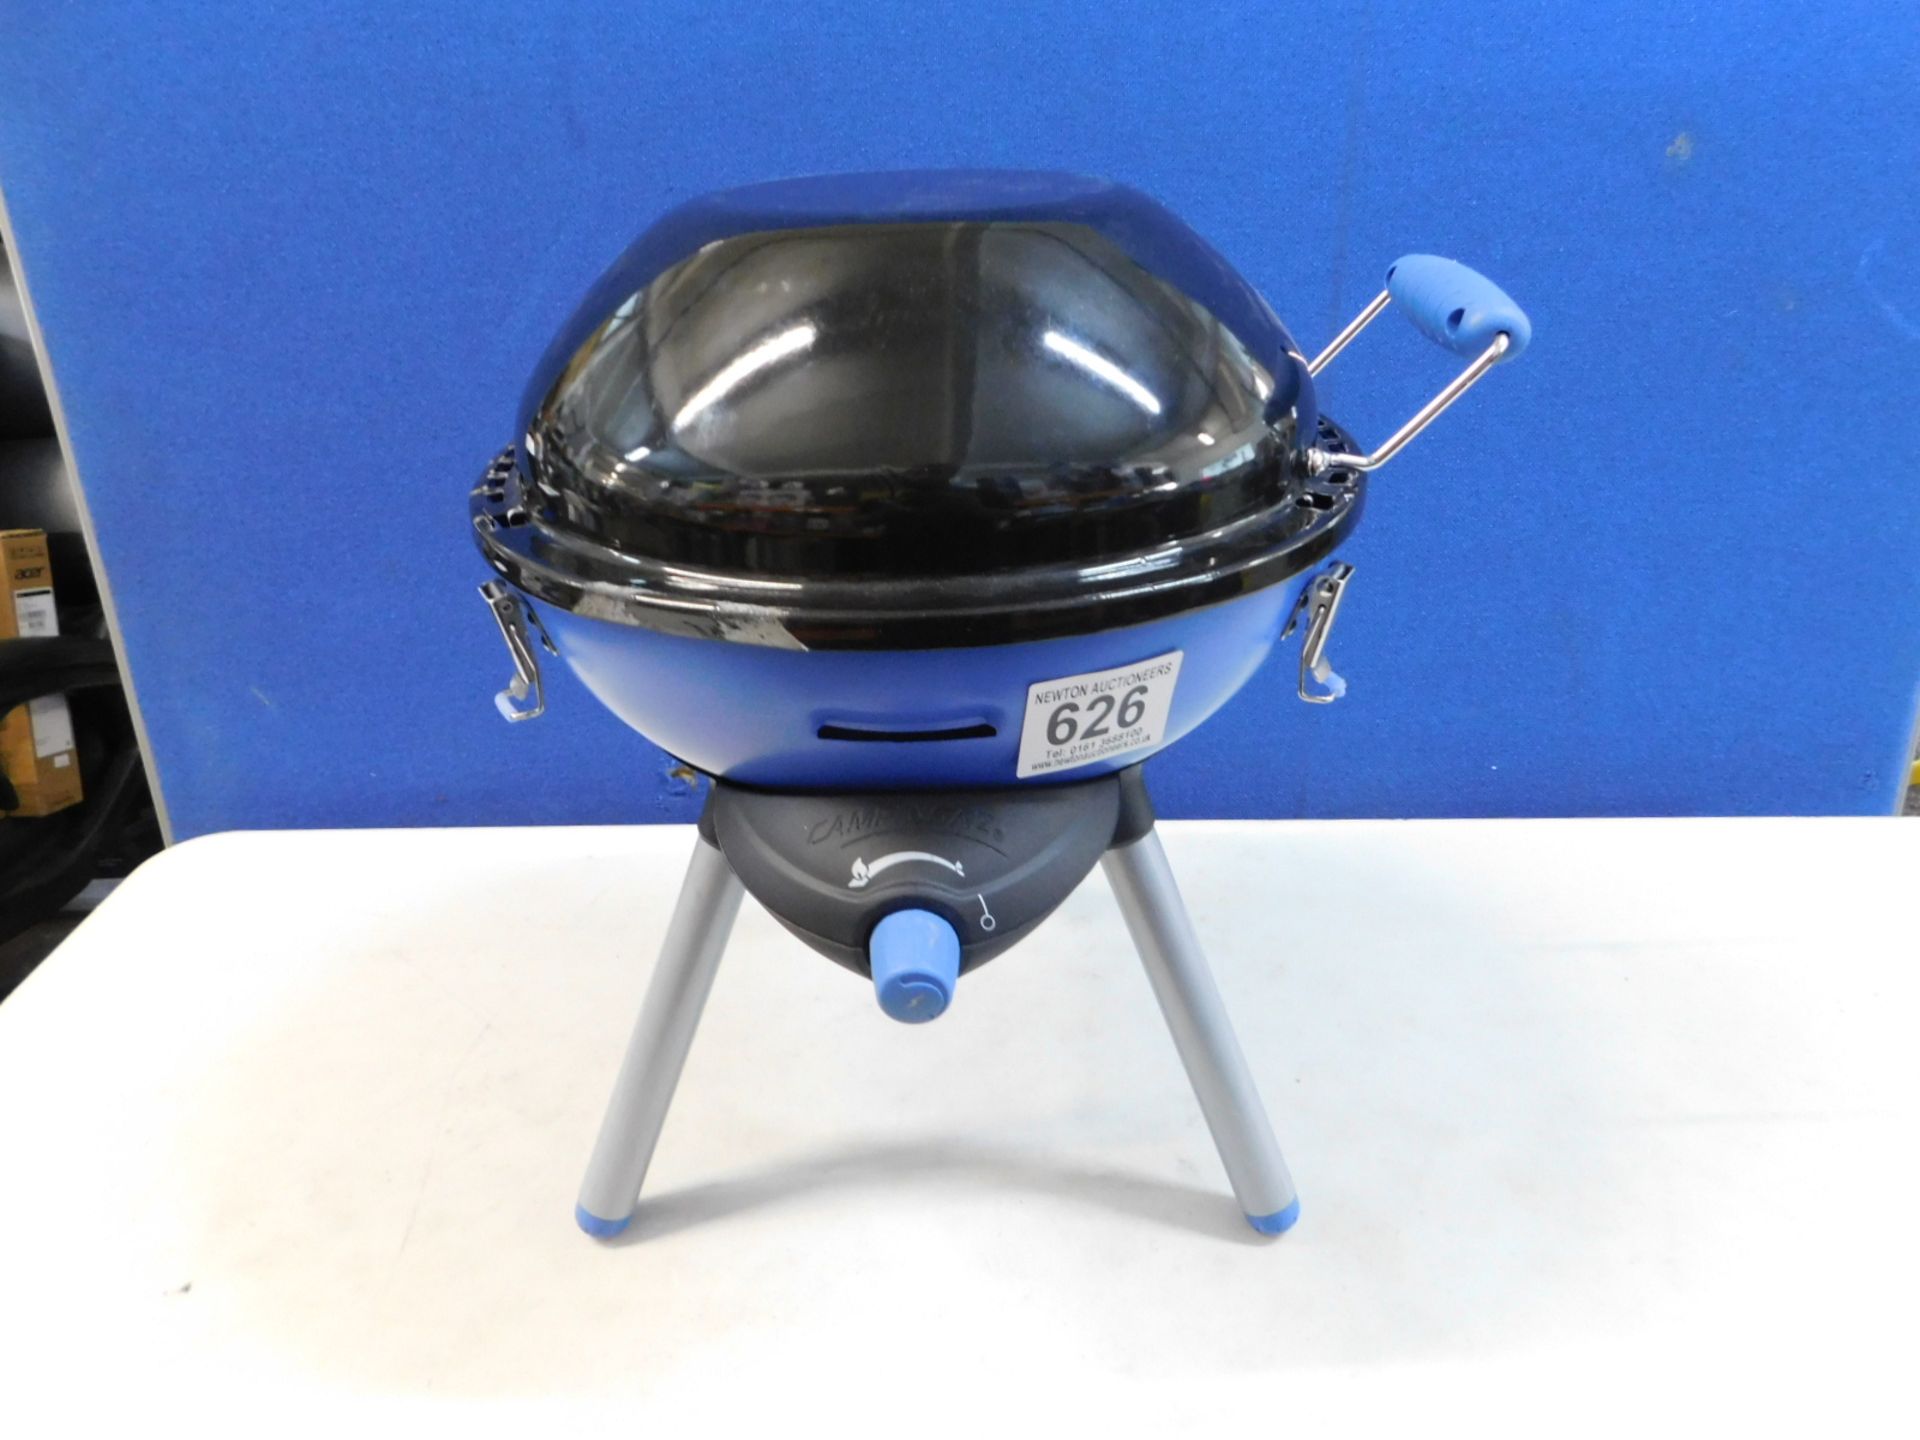 1 CAMPINGAZ PARTY GRILL 400 CAMPING STOVE RRP Â£89.99